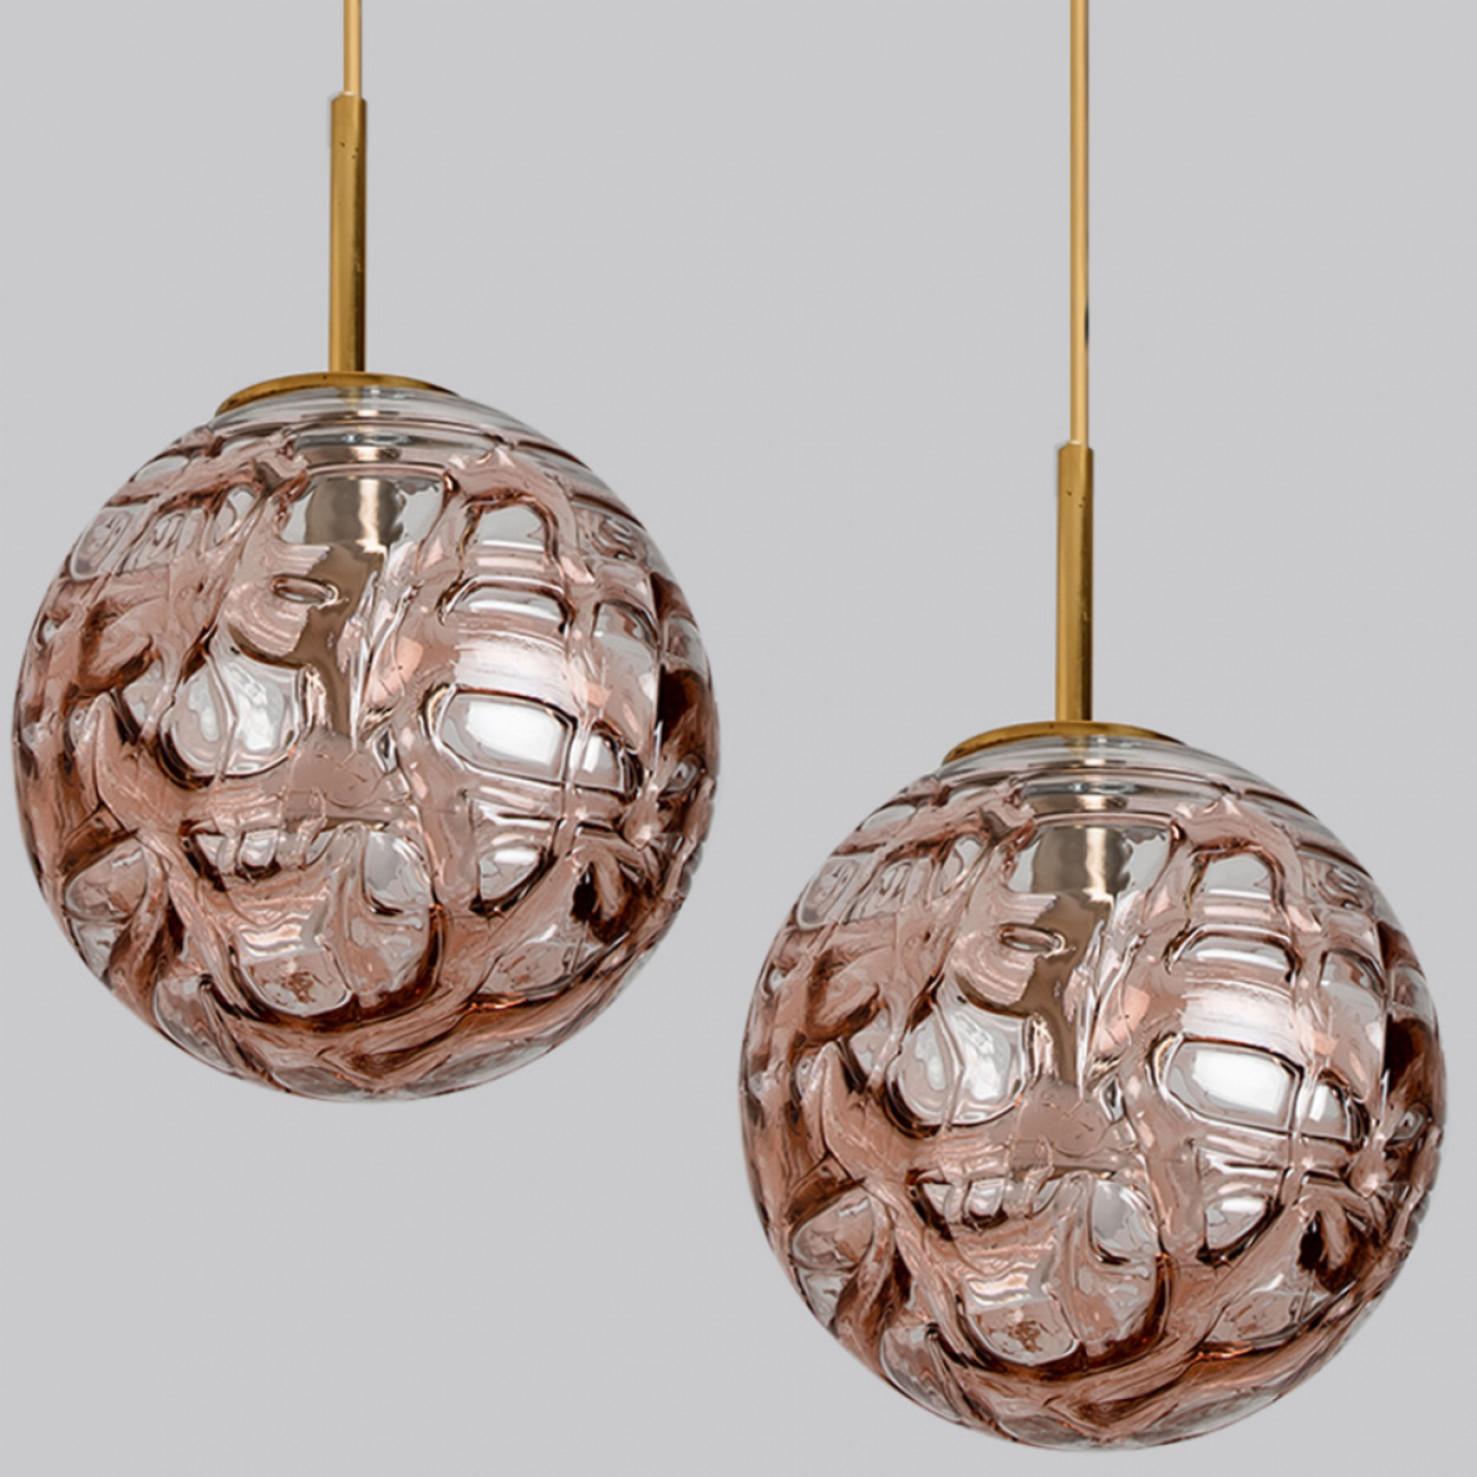 1 of the 2 Doria Leuchten rose globes (in collaboration with Murano) in the style of Venini, manufactured, circa 1960.

High-end thick Murano crystal glass shades made out of overlay glasses in the color Rose, applied in irregular swirls. Mind